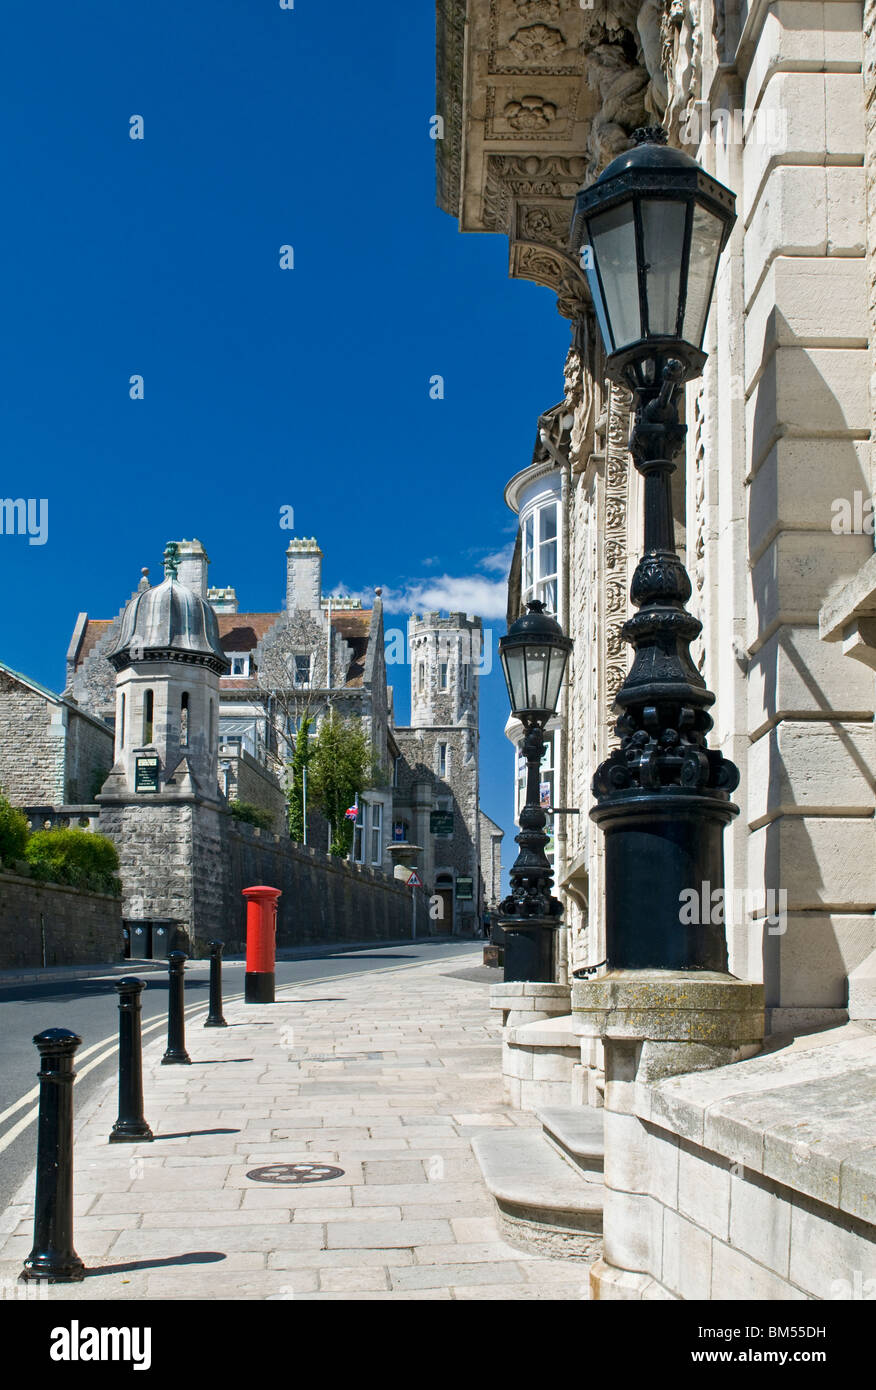 SWANAGE View along High Street toward the landmark Purbeck House Hotel with entrance to the town hall in foreground Swanage Dorset UK Stock Photo